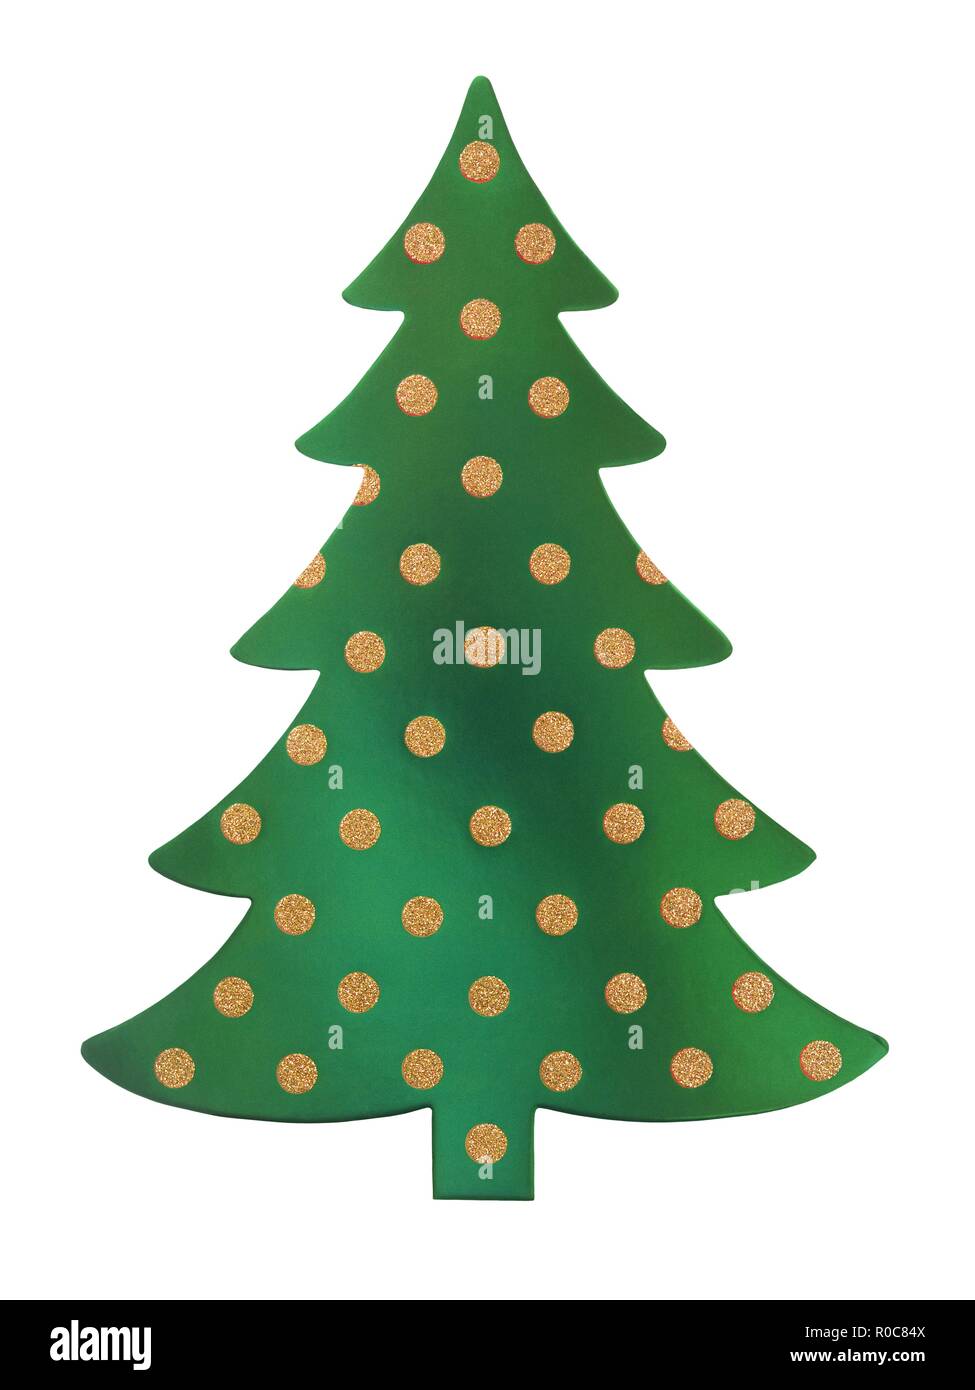 Green Christmas tree isolated on white background Stock Photo